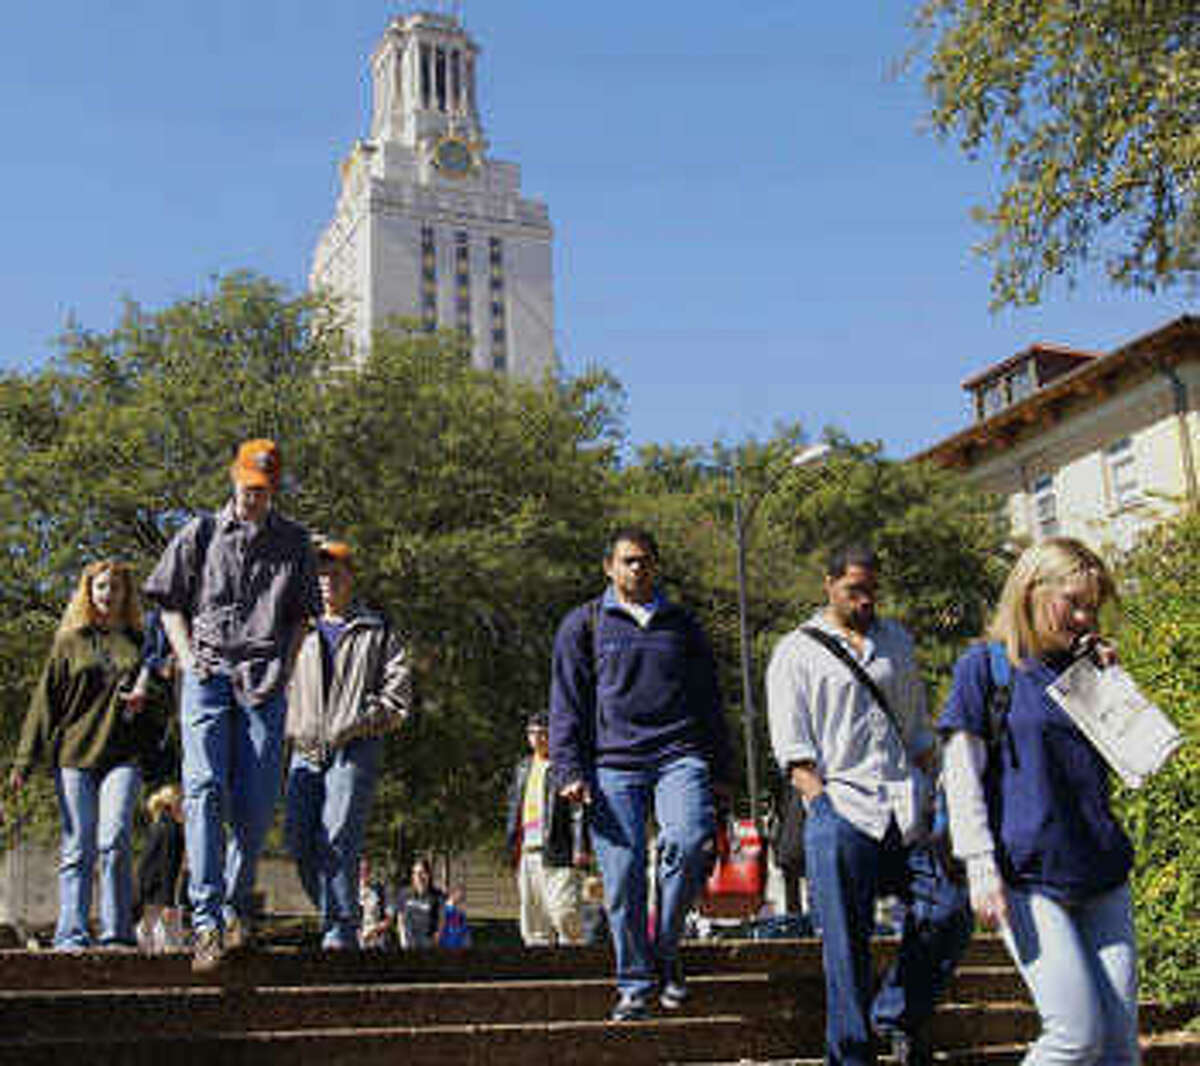 Students head to classes at UT-Austin, which was ranked as the seventh fittest university in America.